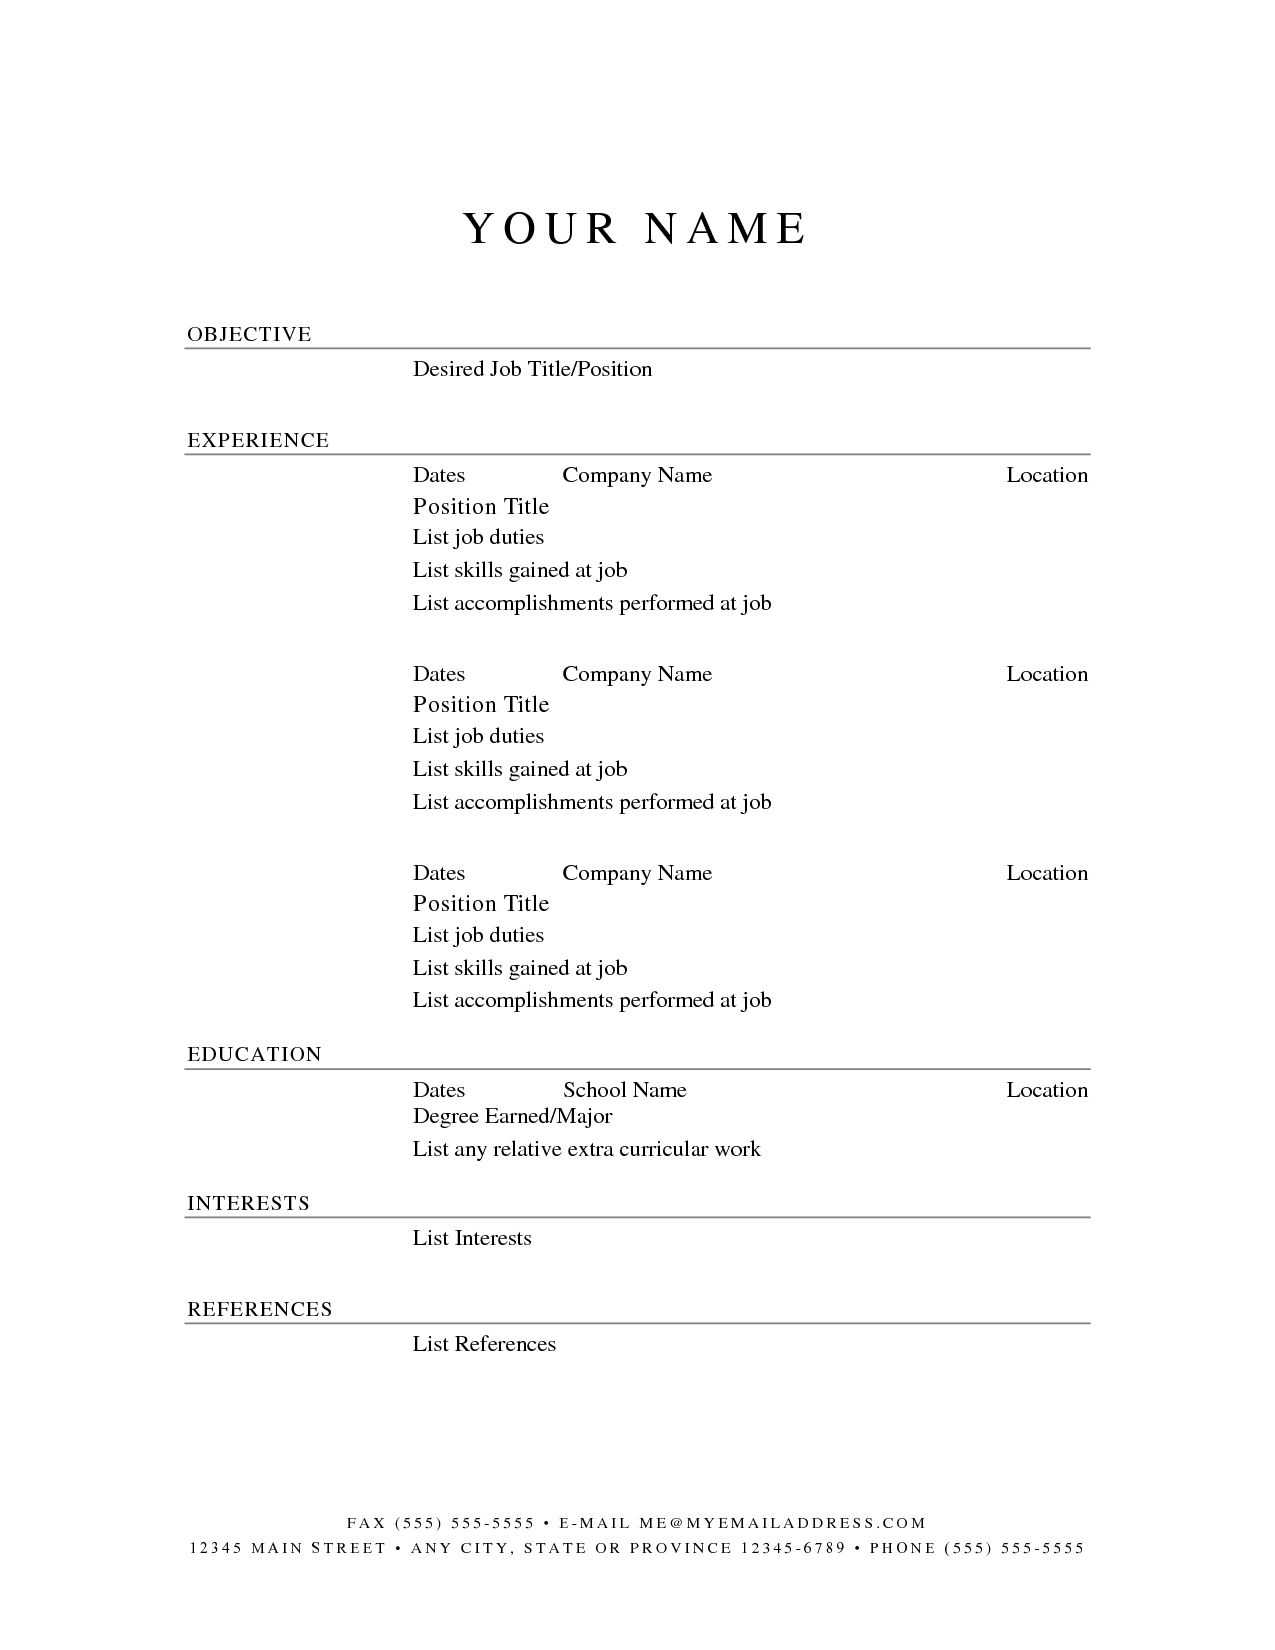 Blank Resume Formats – Raptor.redmini.co Intended For Free Blank Resume Templates For Microsoft Word